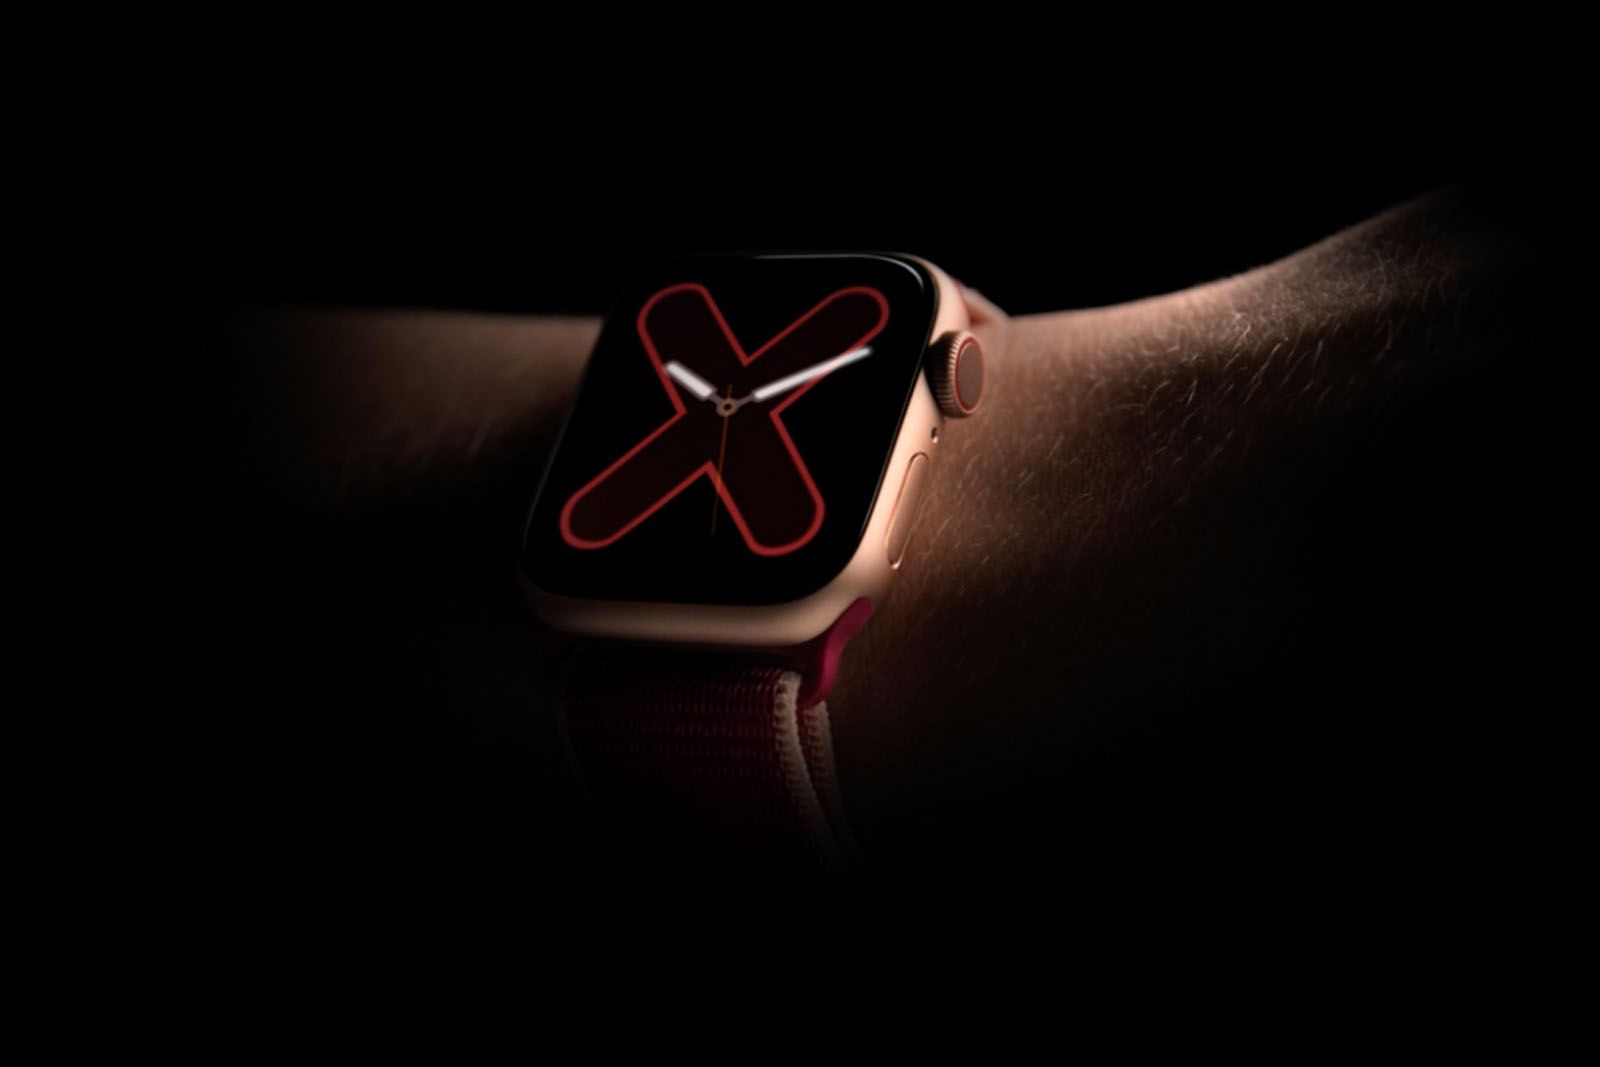 Apple Watch Series 5 official with Always On display built-in compass and new material options image 1